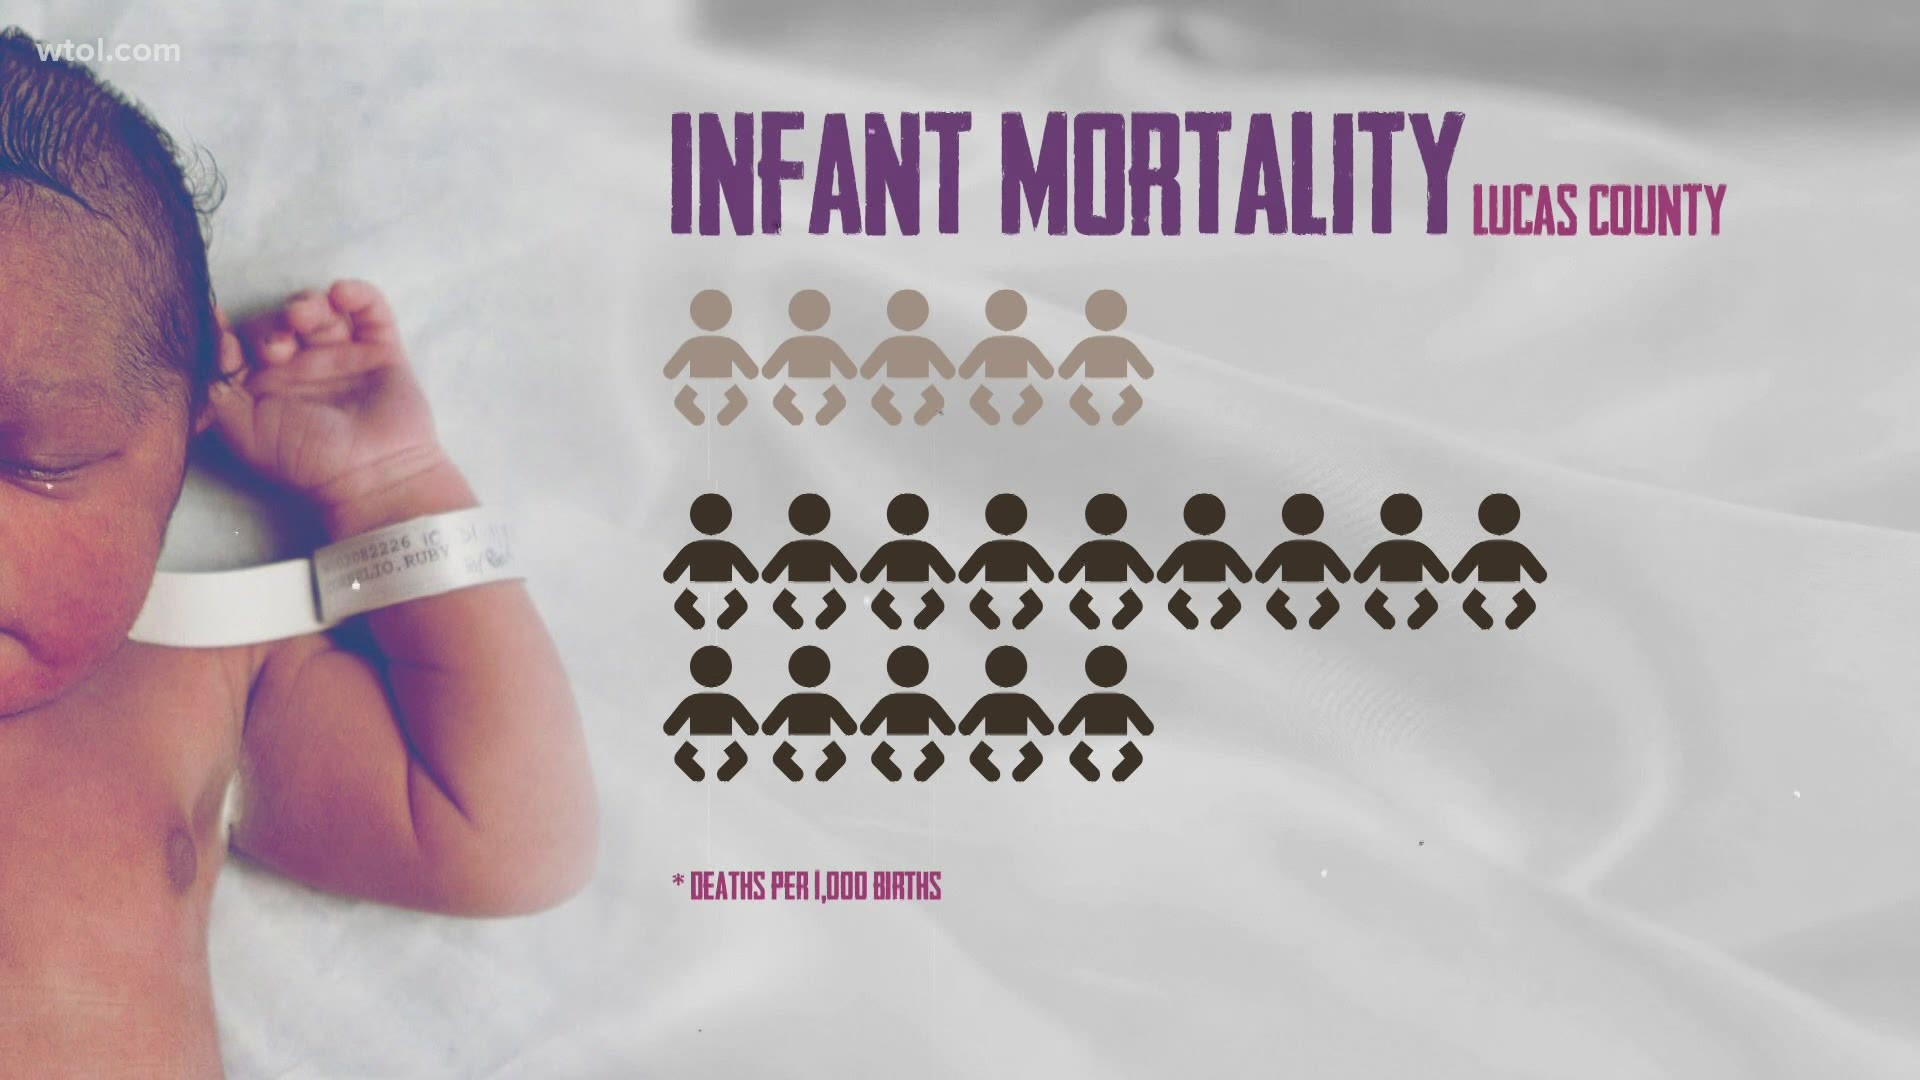 In Ohio, a Black infant is nearly three times more likely to die before turning one year old than a white baby.